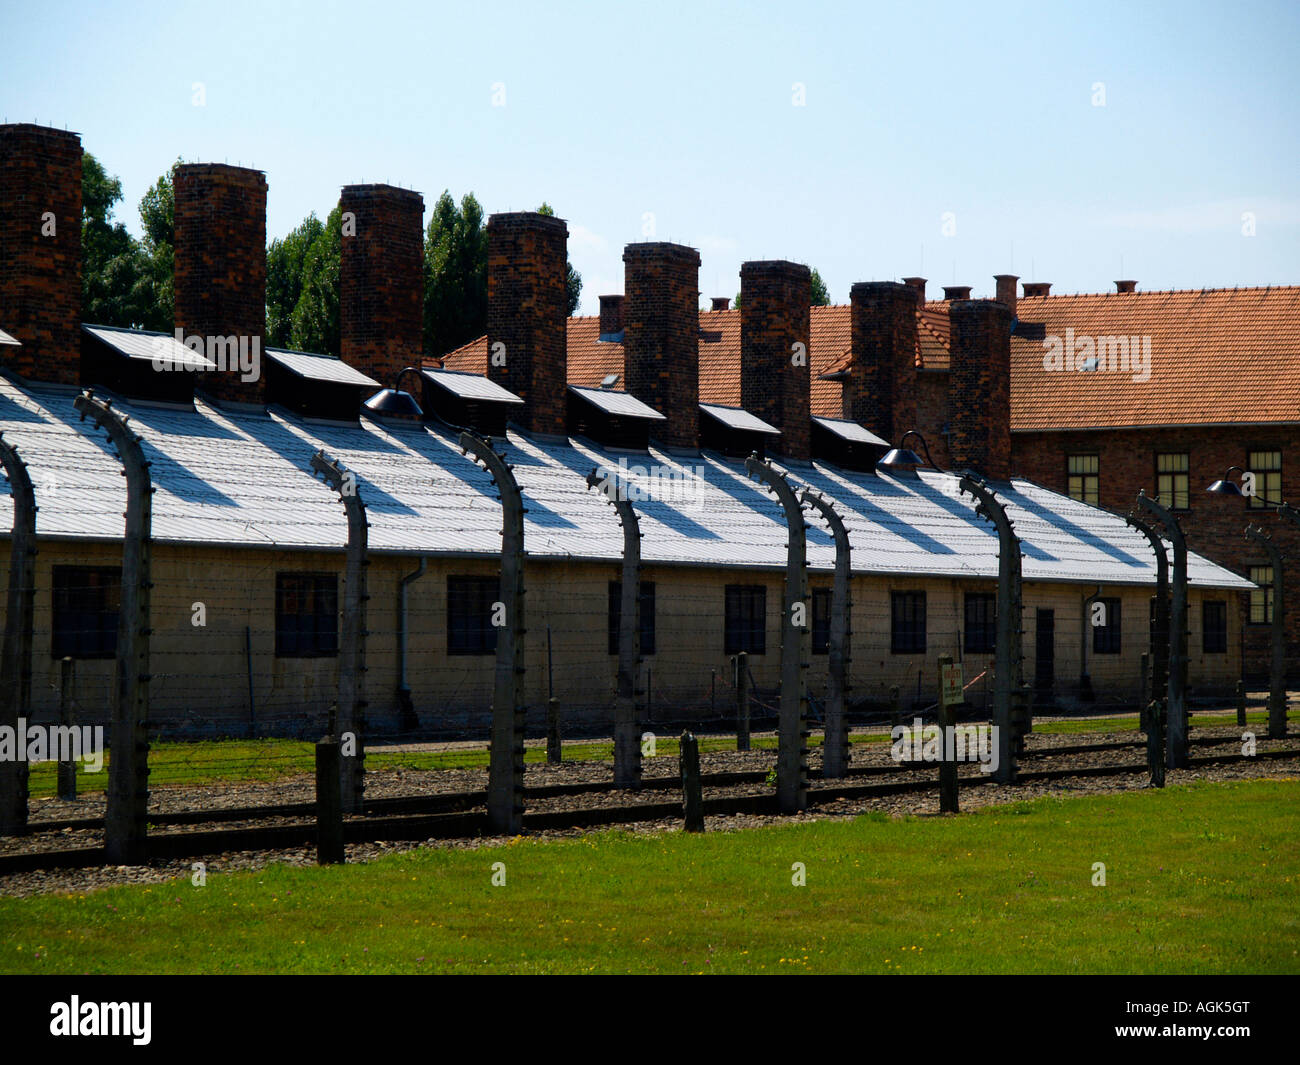 Barbed wire and administrative buildings at the Auschwitz concentration camp outside of Krakow, Poland. Stock Photo